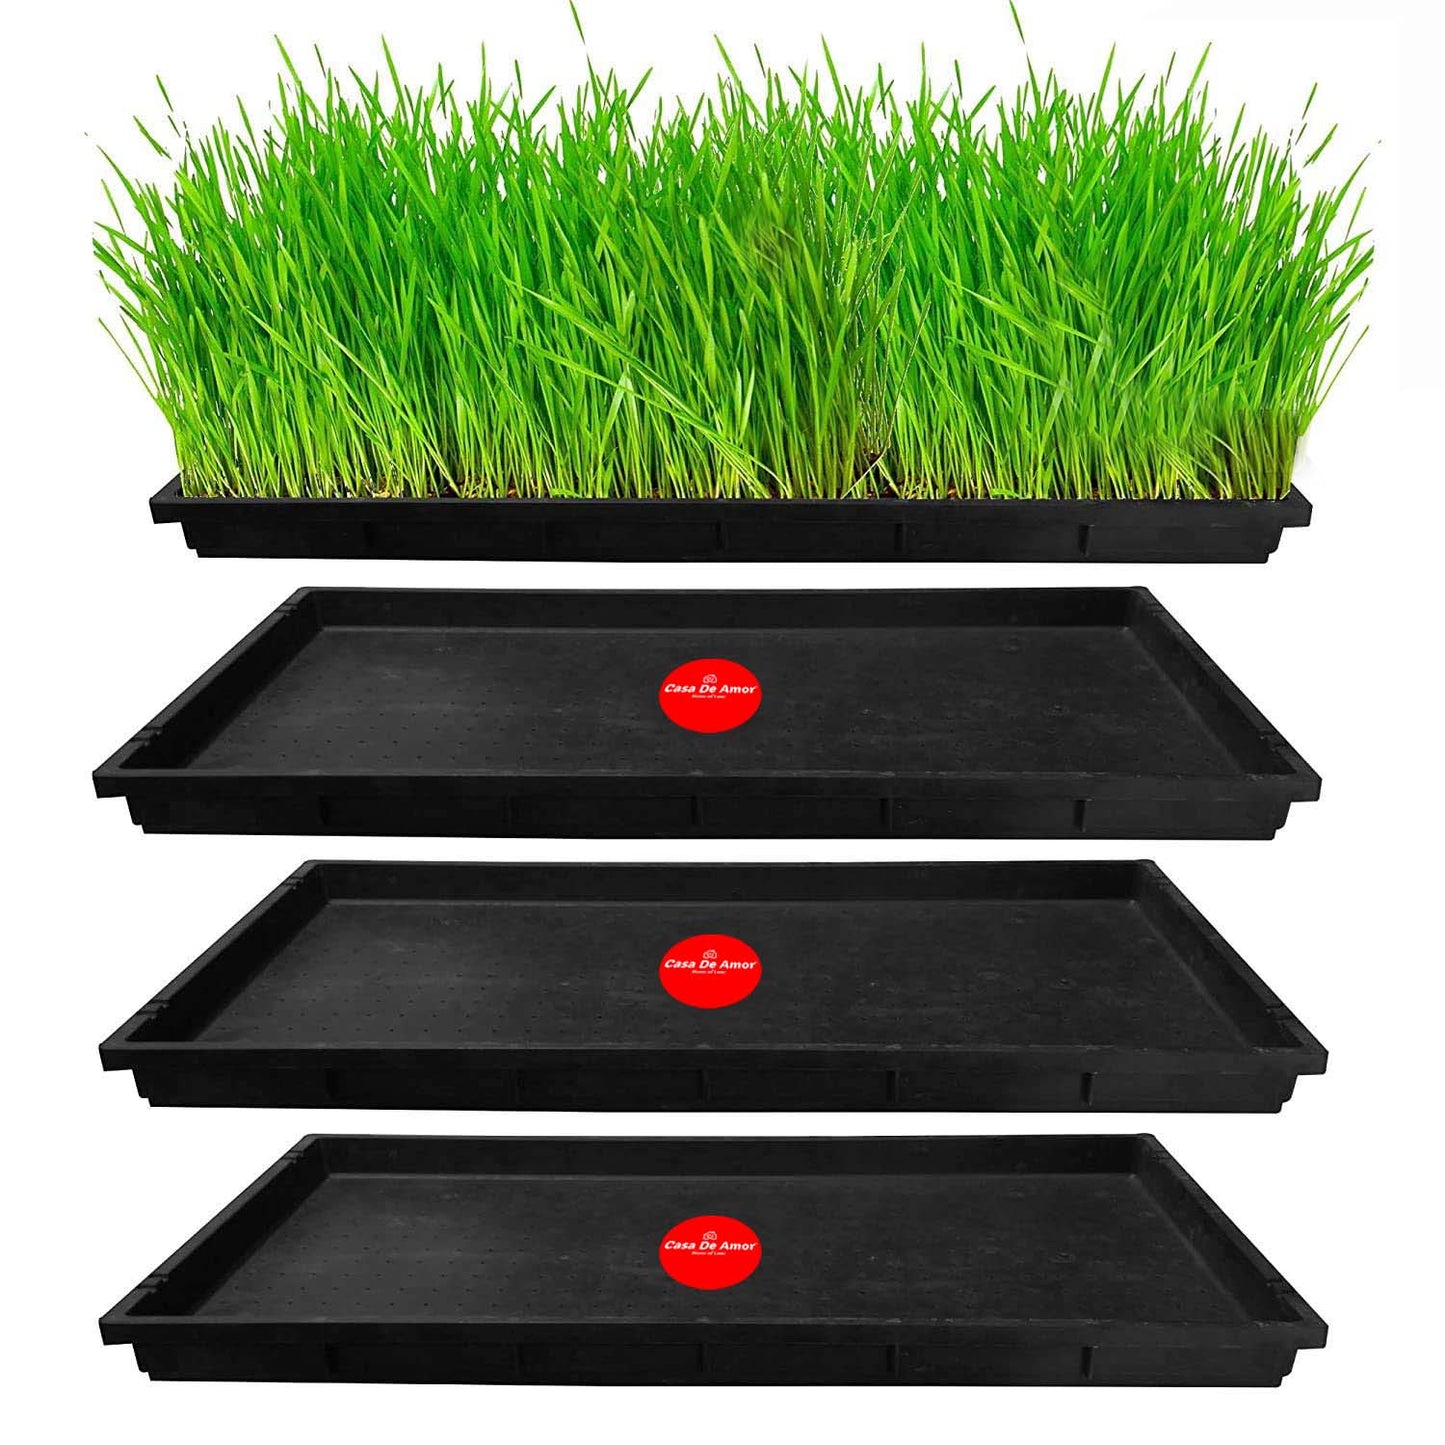 Casa De Amor Wheat Grass Trays, Growing Microgreen Tray, Hydroponics, Seedling Starter for Greenhouse, Hydroponics, Vegetables, Flower Germination, Paddy Tray, Thick Reusable